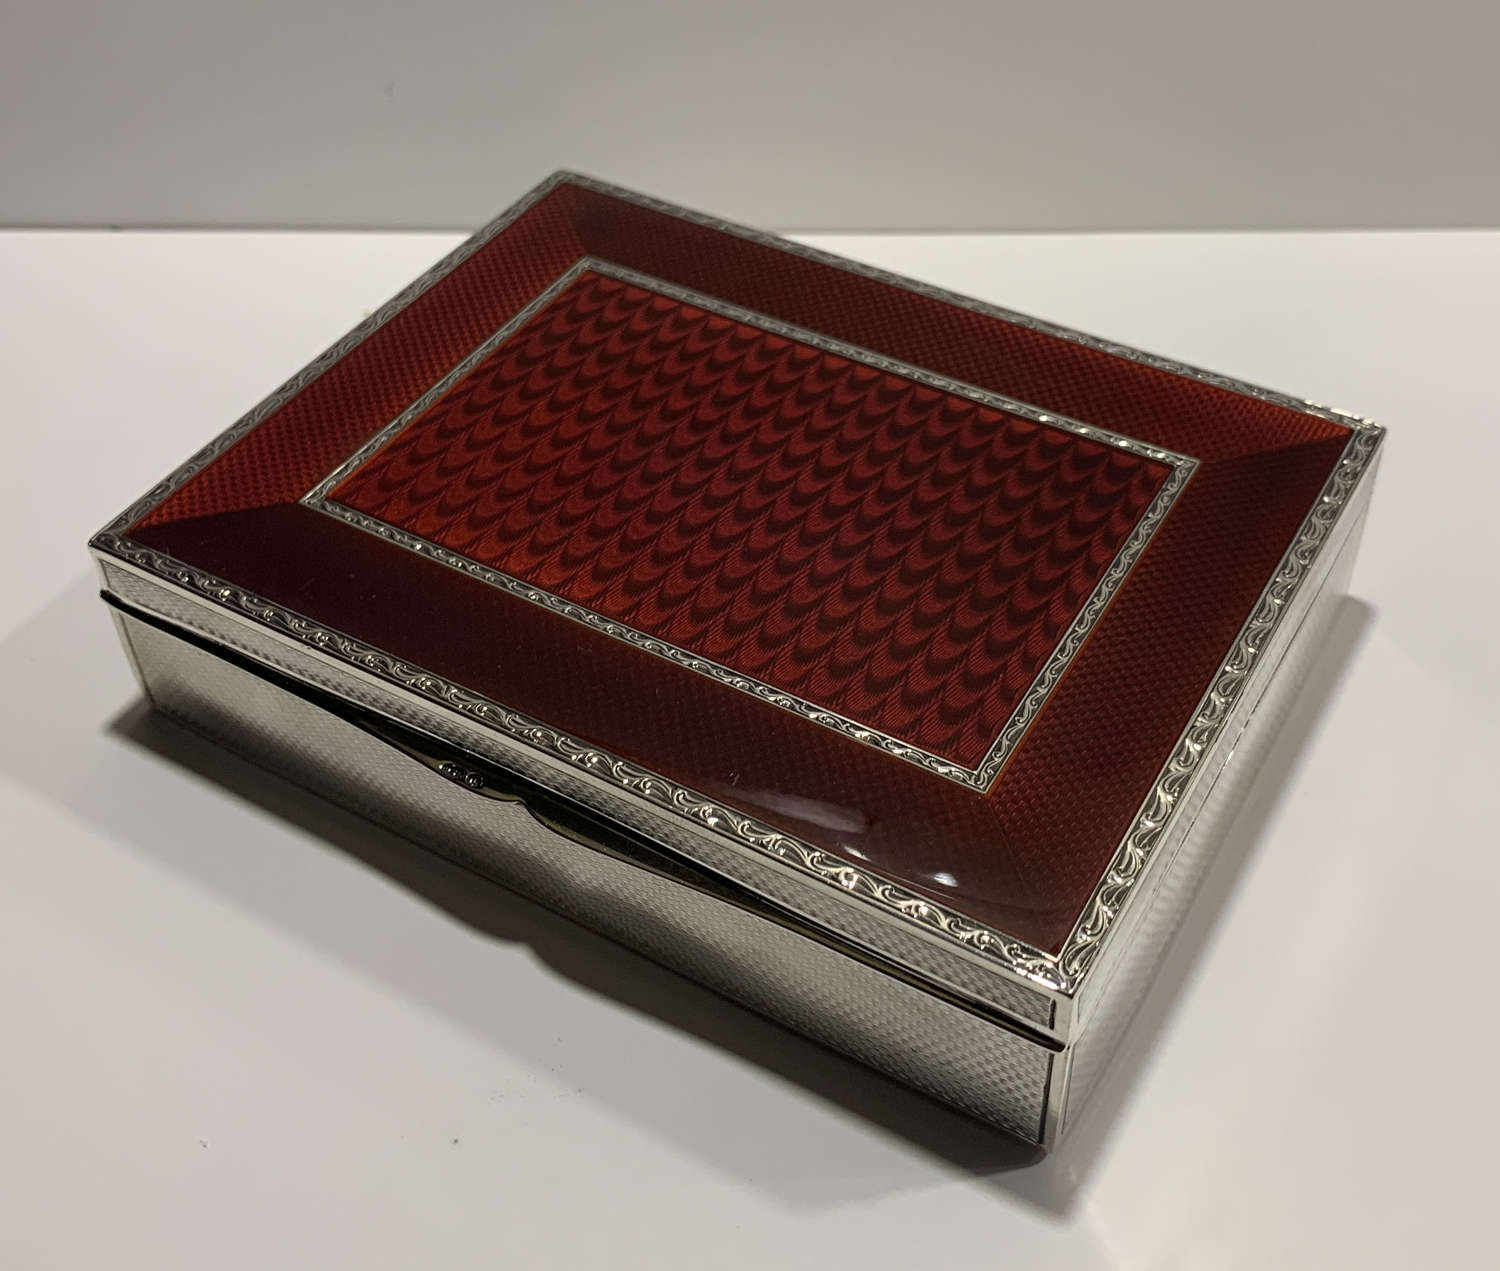 A sterling silver and blood red guilloche enamel cigar / cigarette box